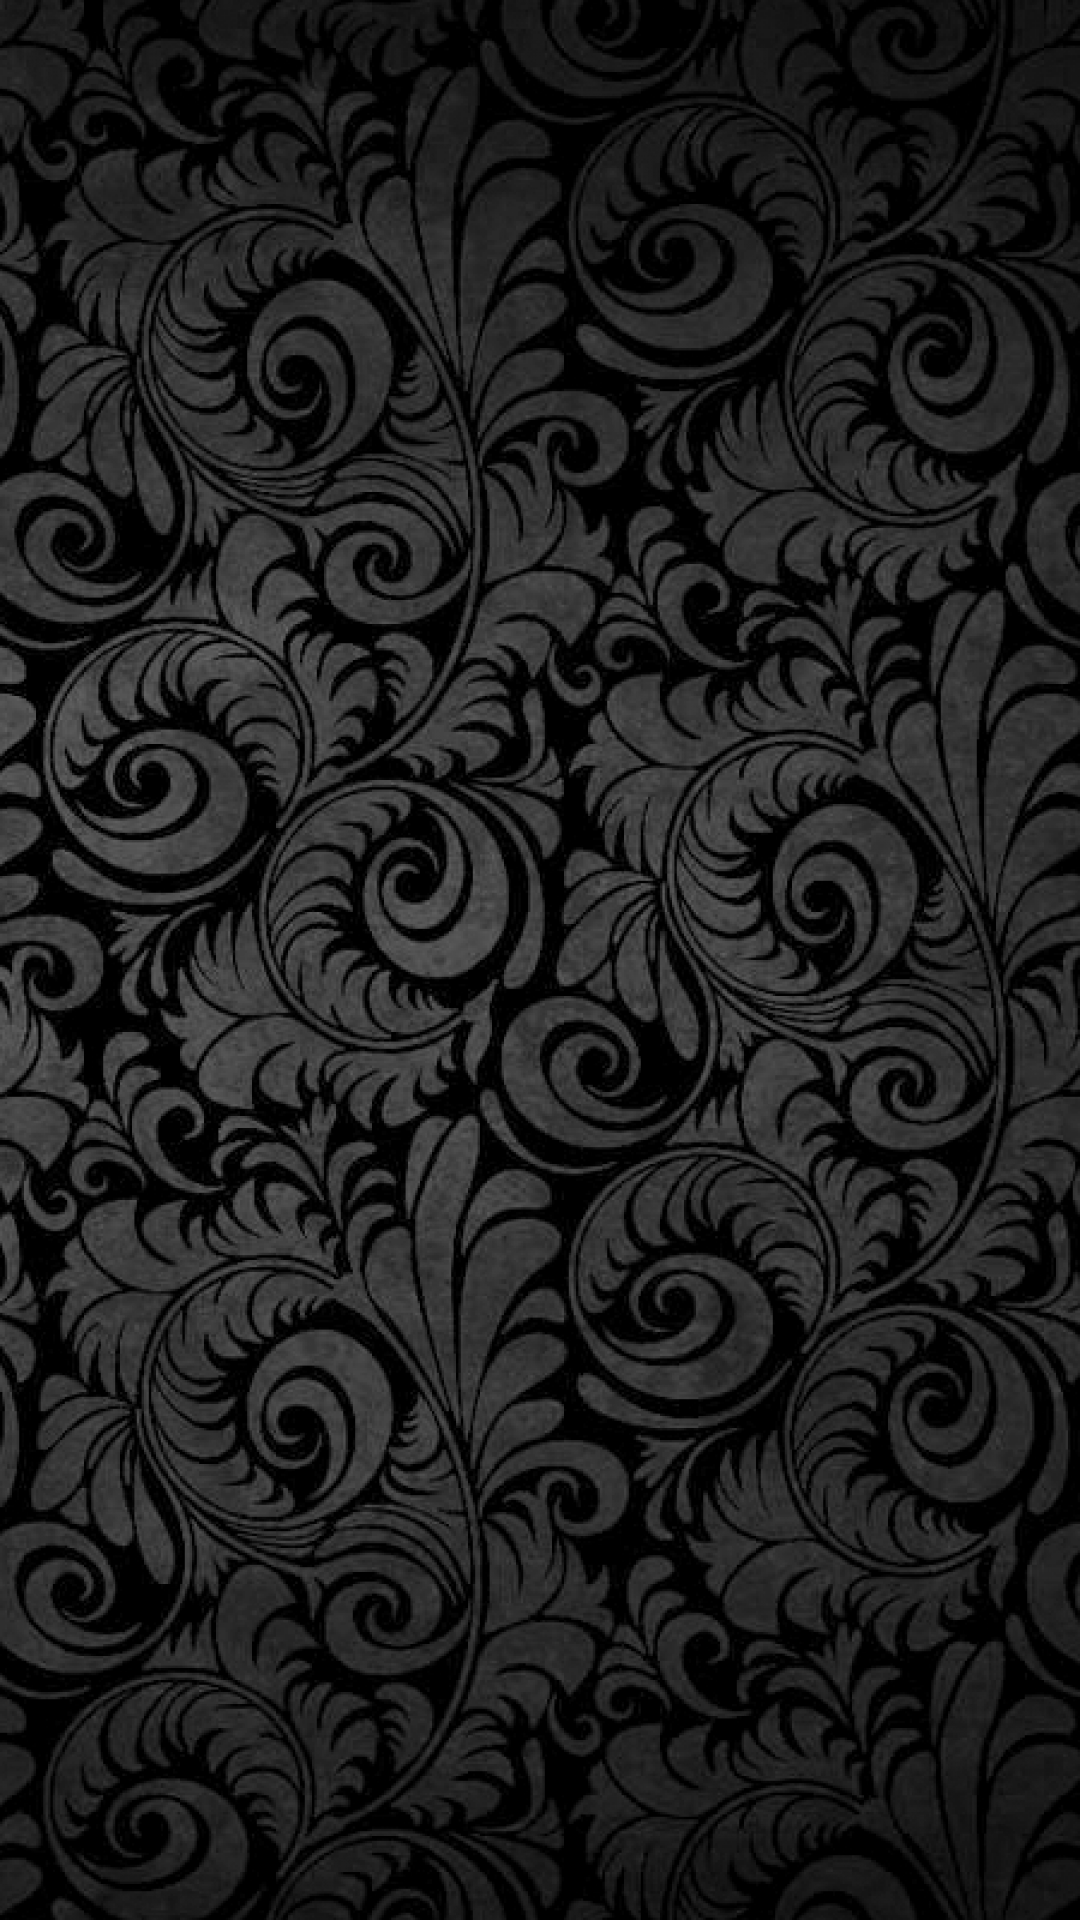 Black HD Wallpapers  Top Ultra HD Black Backgrounds Download